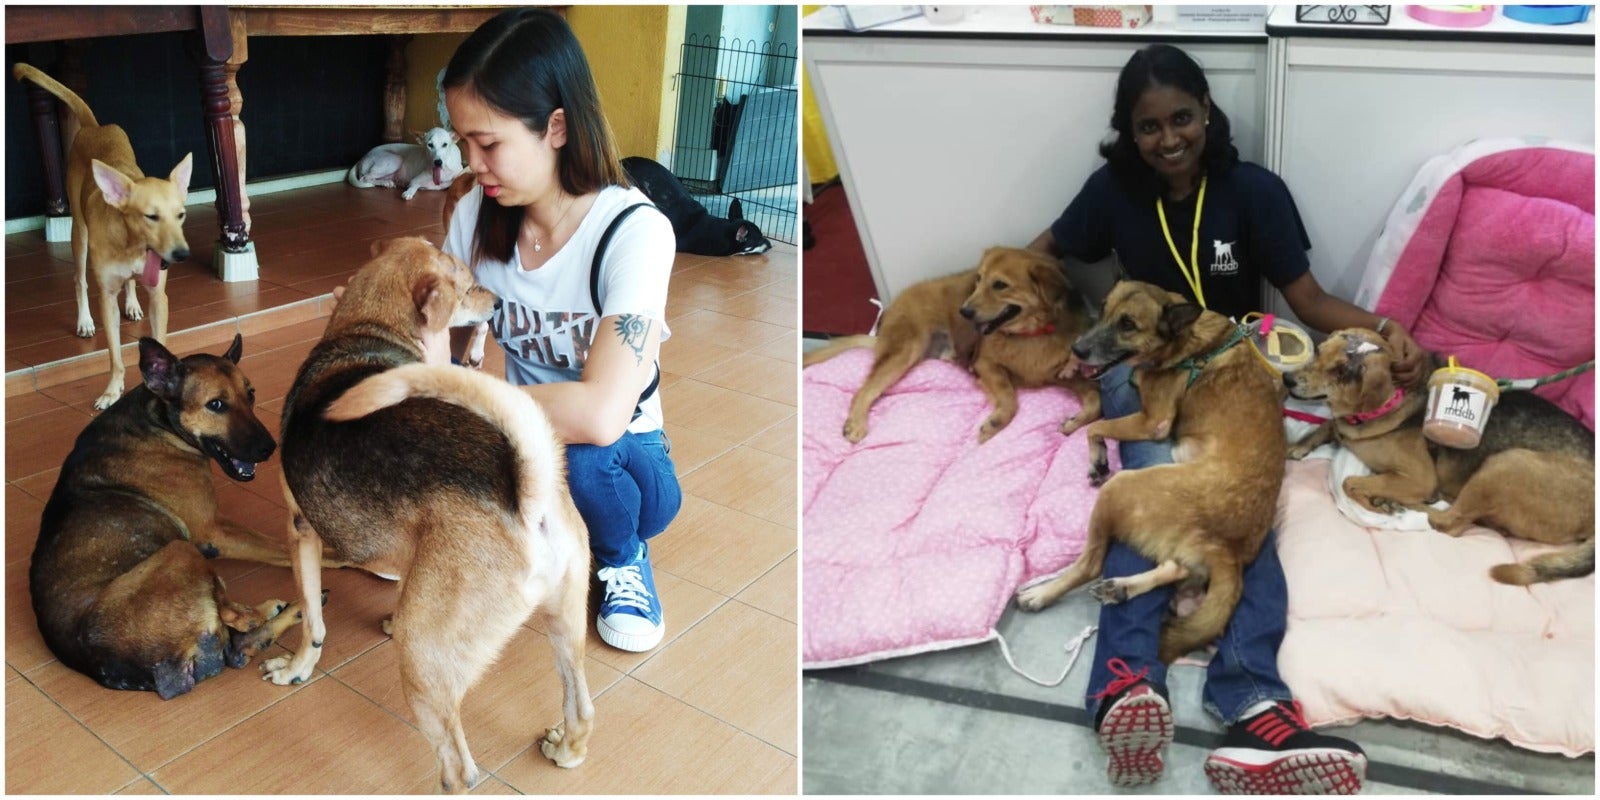 5 Things You Need to Know About This M'sian Dog Shelter That Cares For 200 Dogs - WORLD OF BUZZ 1